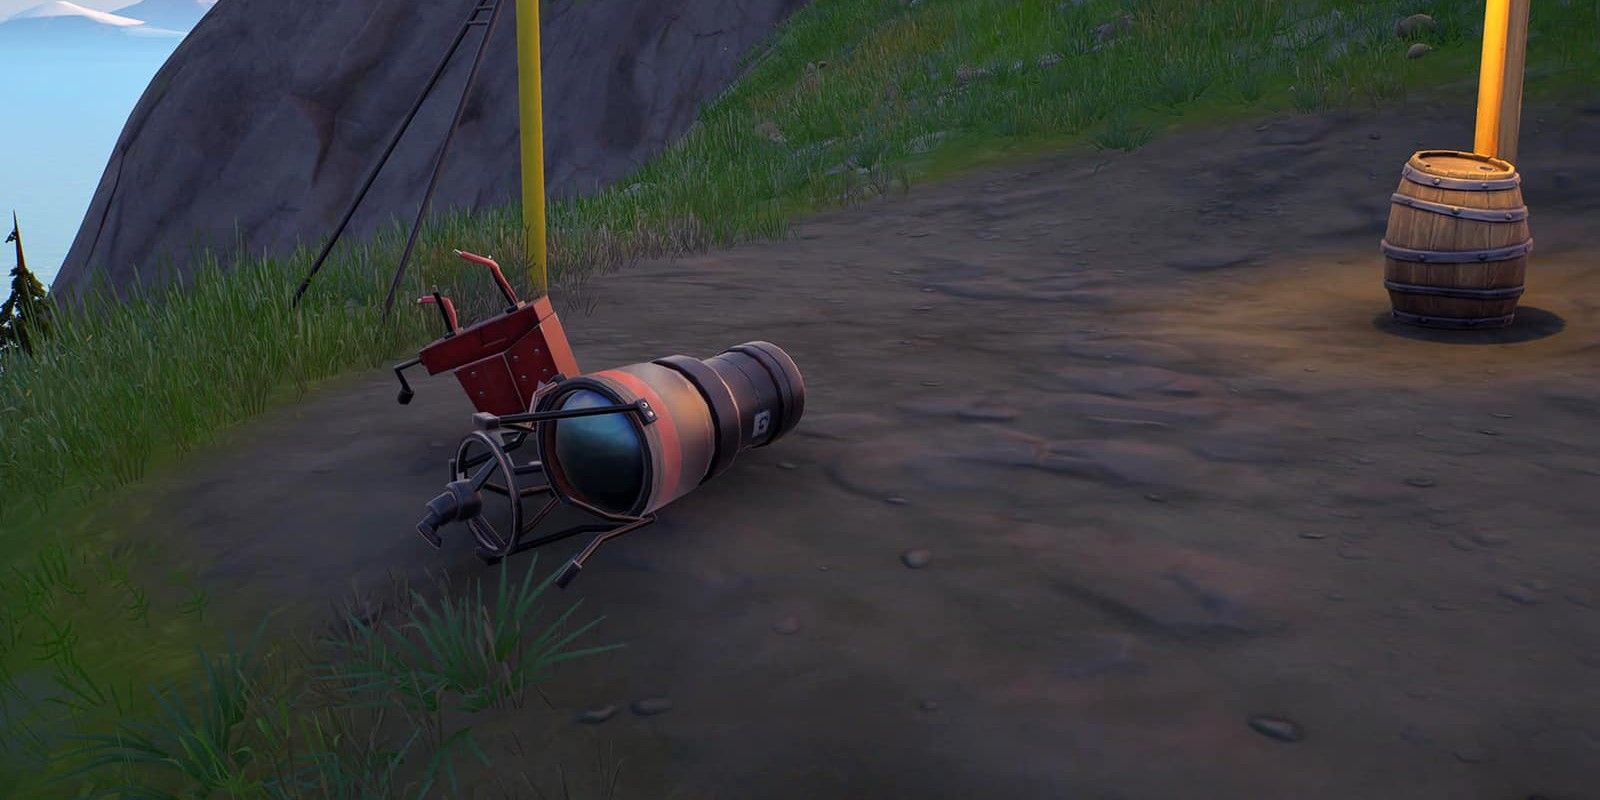 Damaged Telescope at the Weather Station in Fortnite Season 6